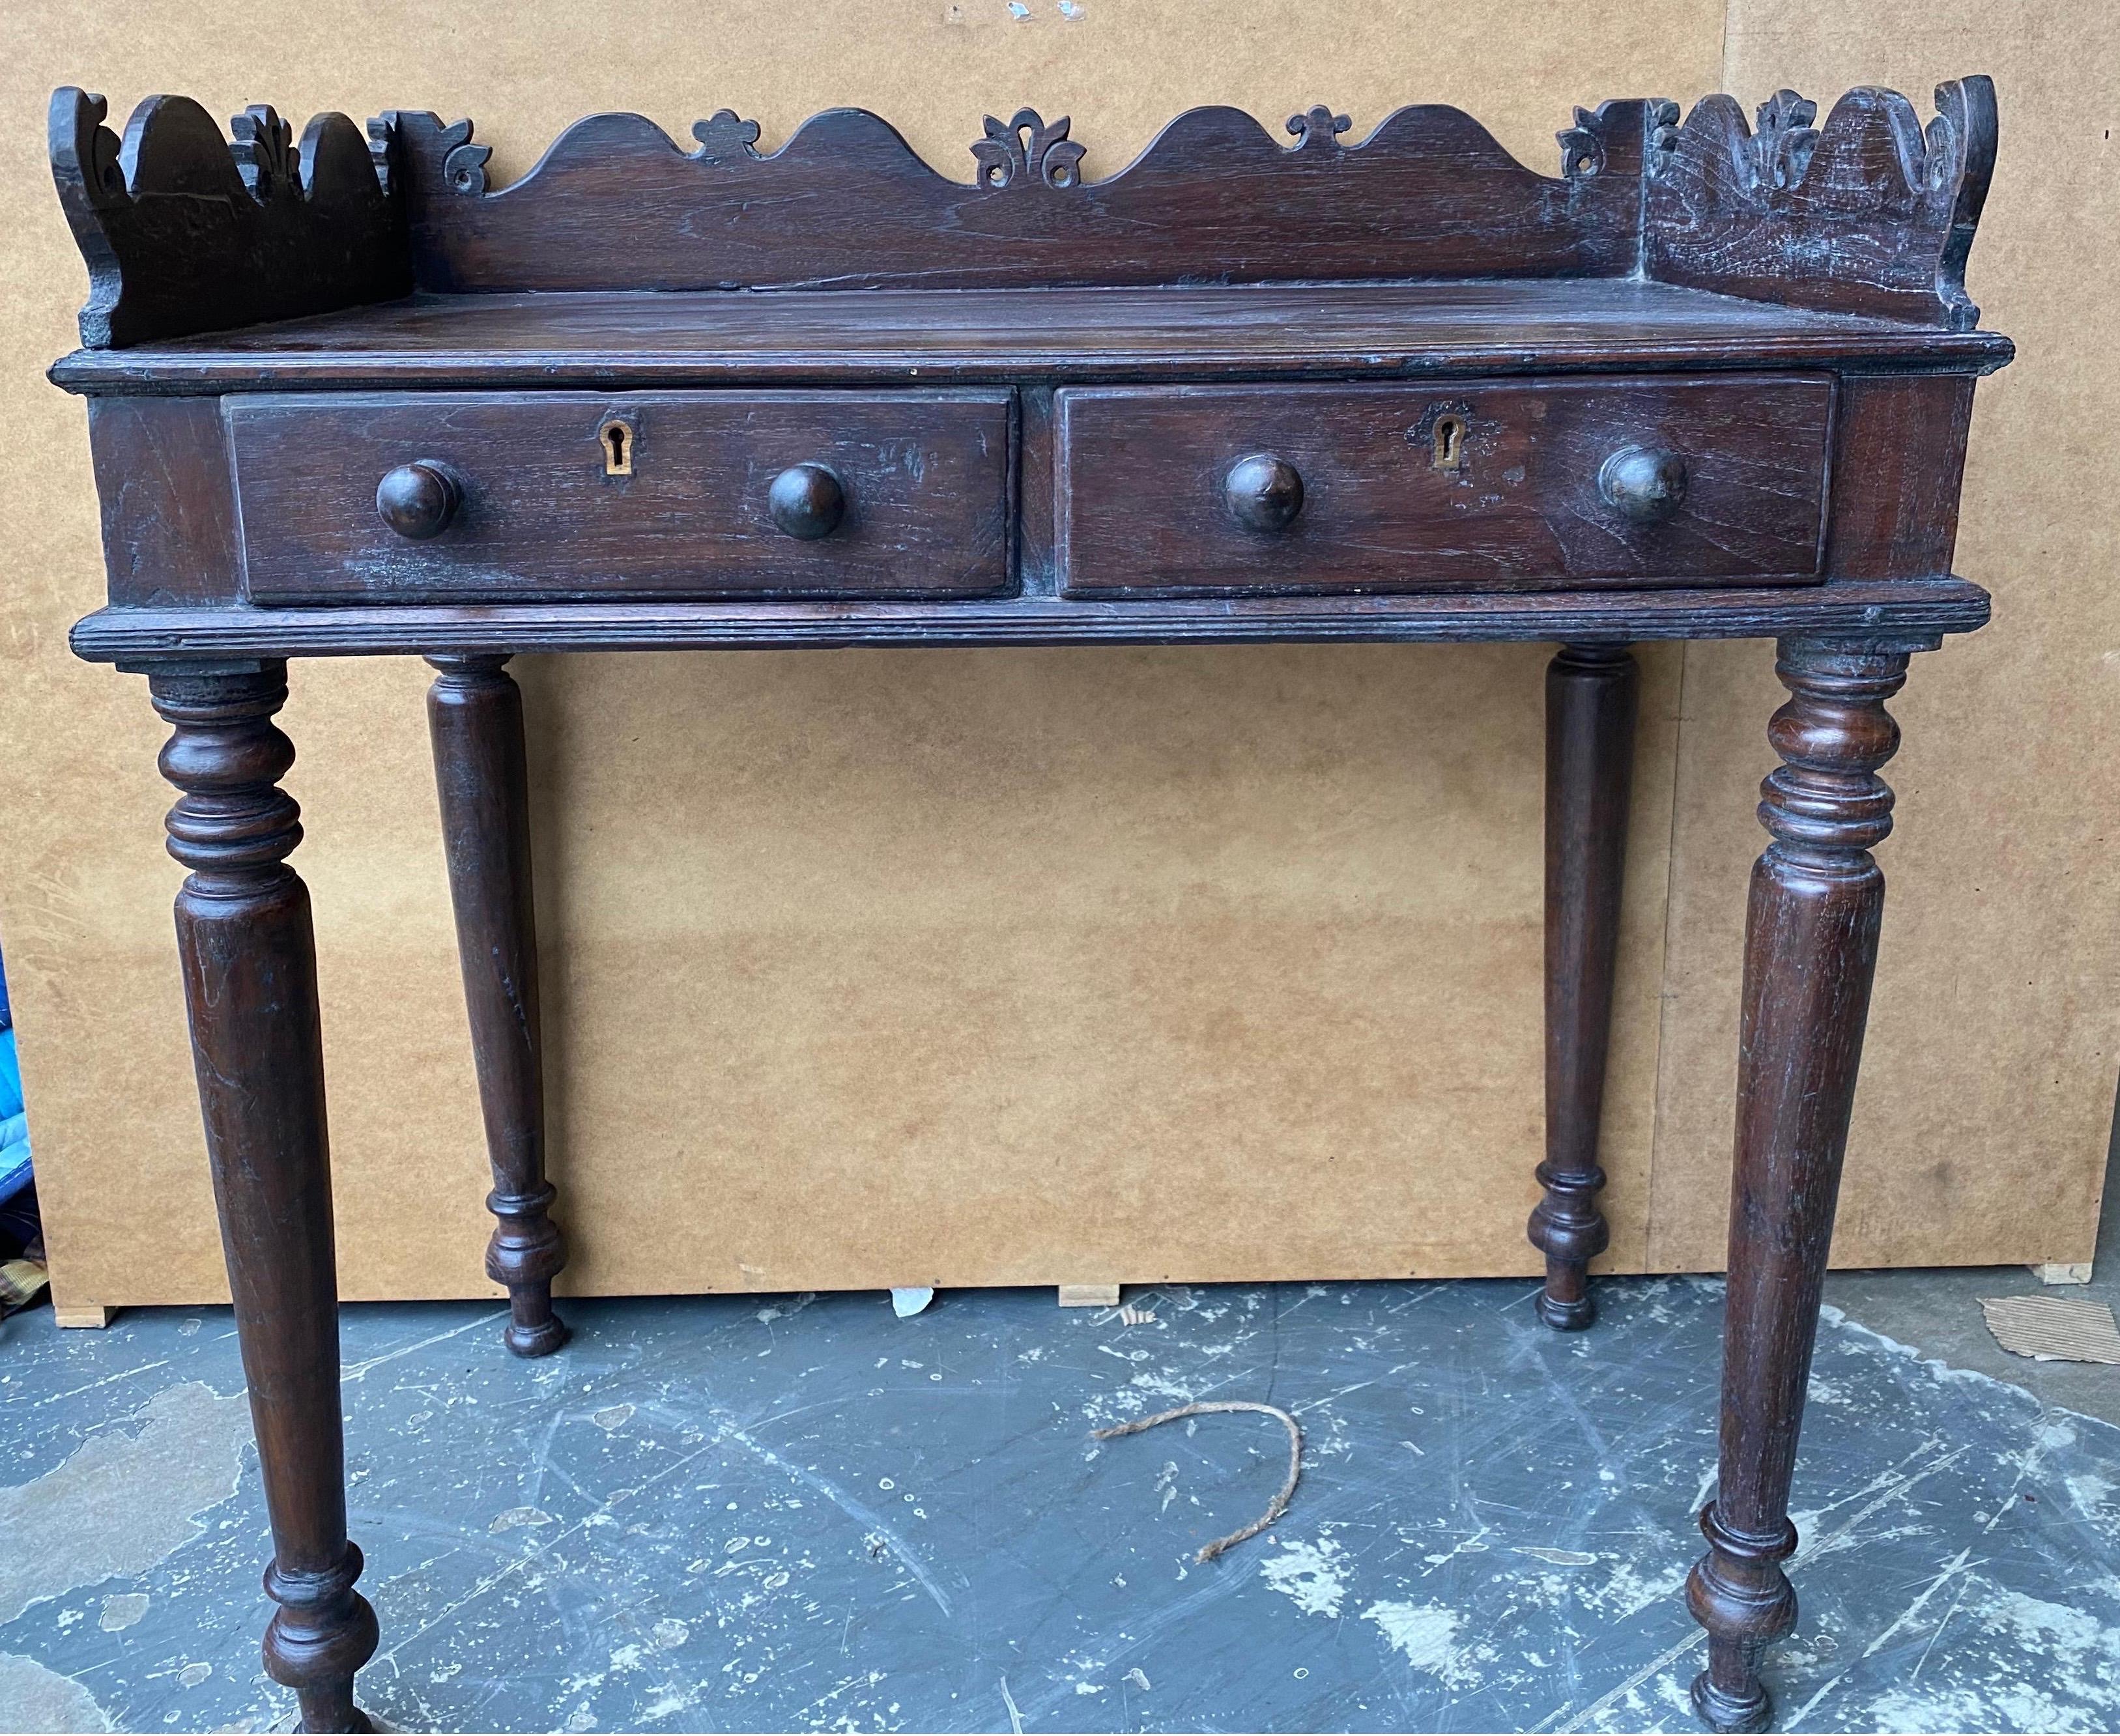 British Indian Ocean Territory 19th Century British Colonial Teak 2-Drawer Console from the East Indies